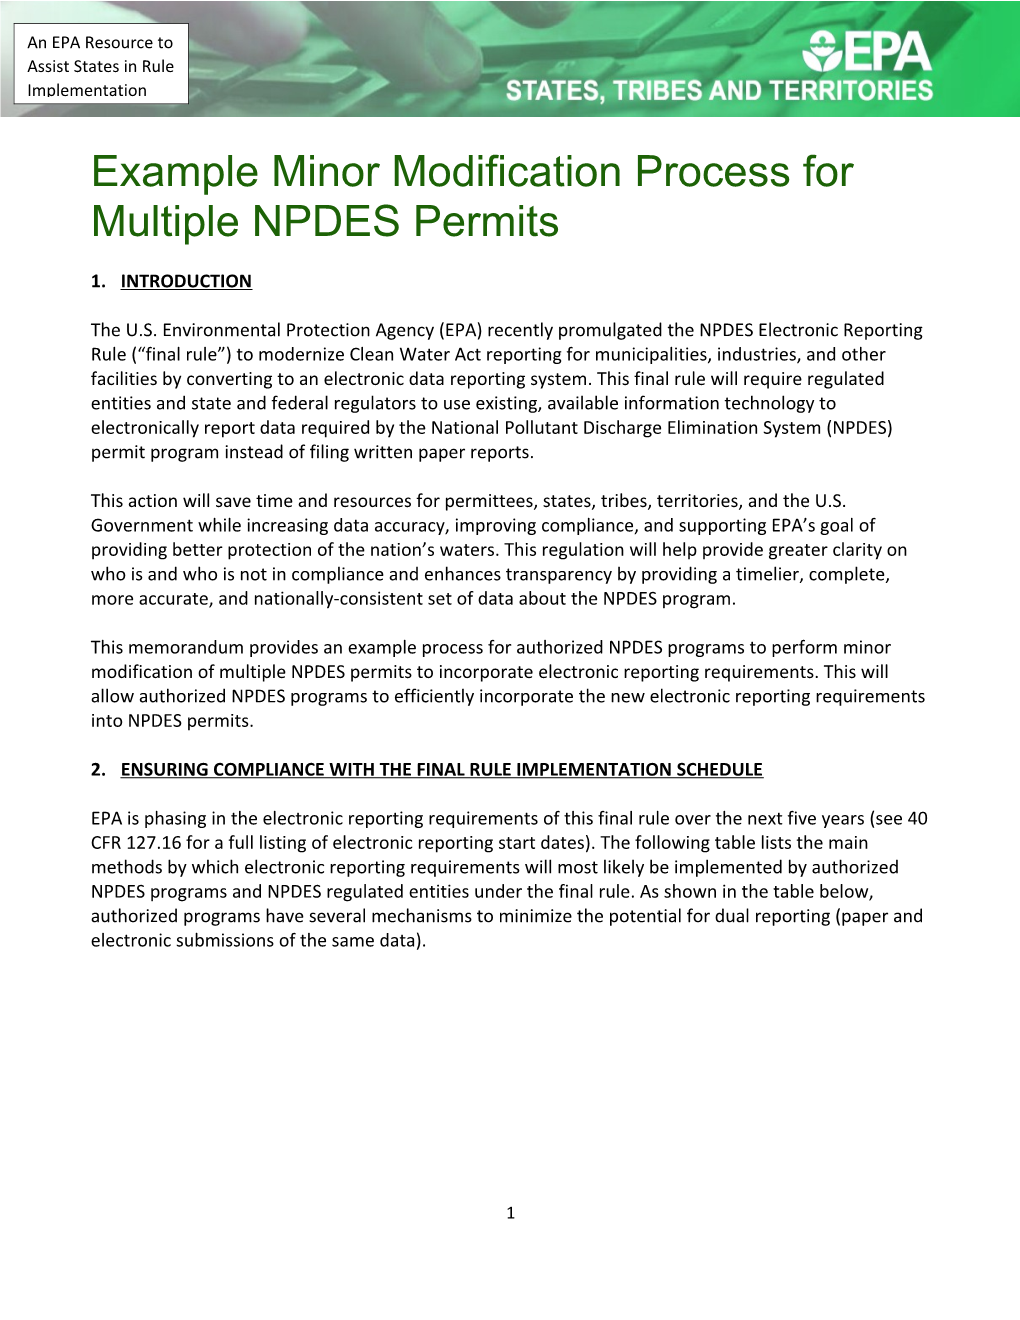 Example Minor Modification Process for Multiple NPDES Permits